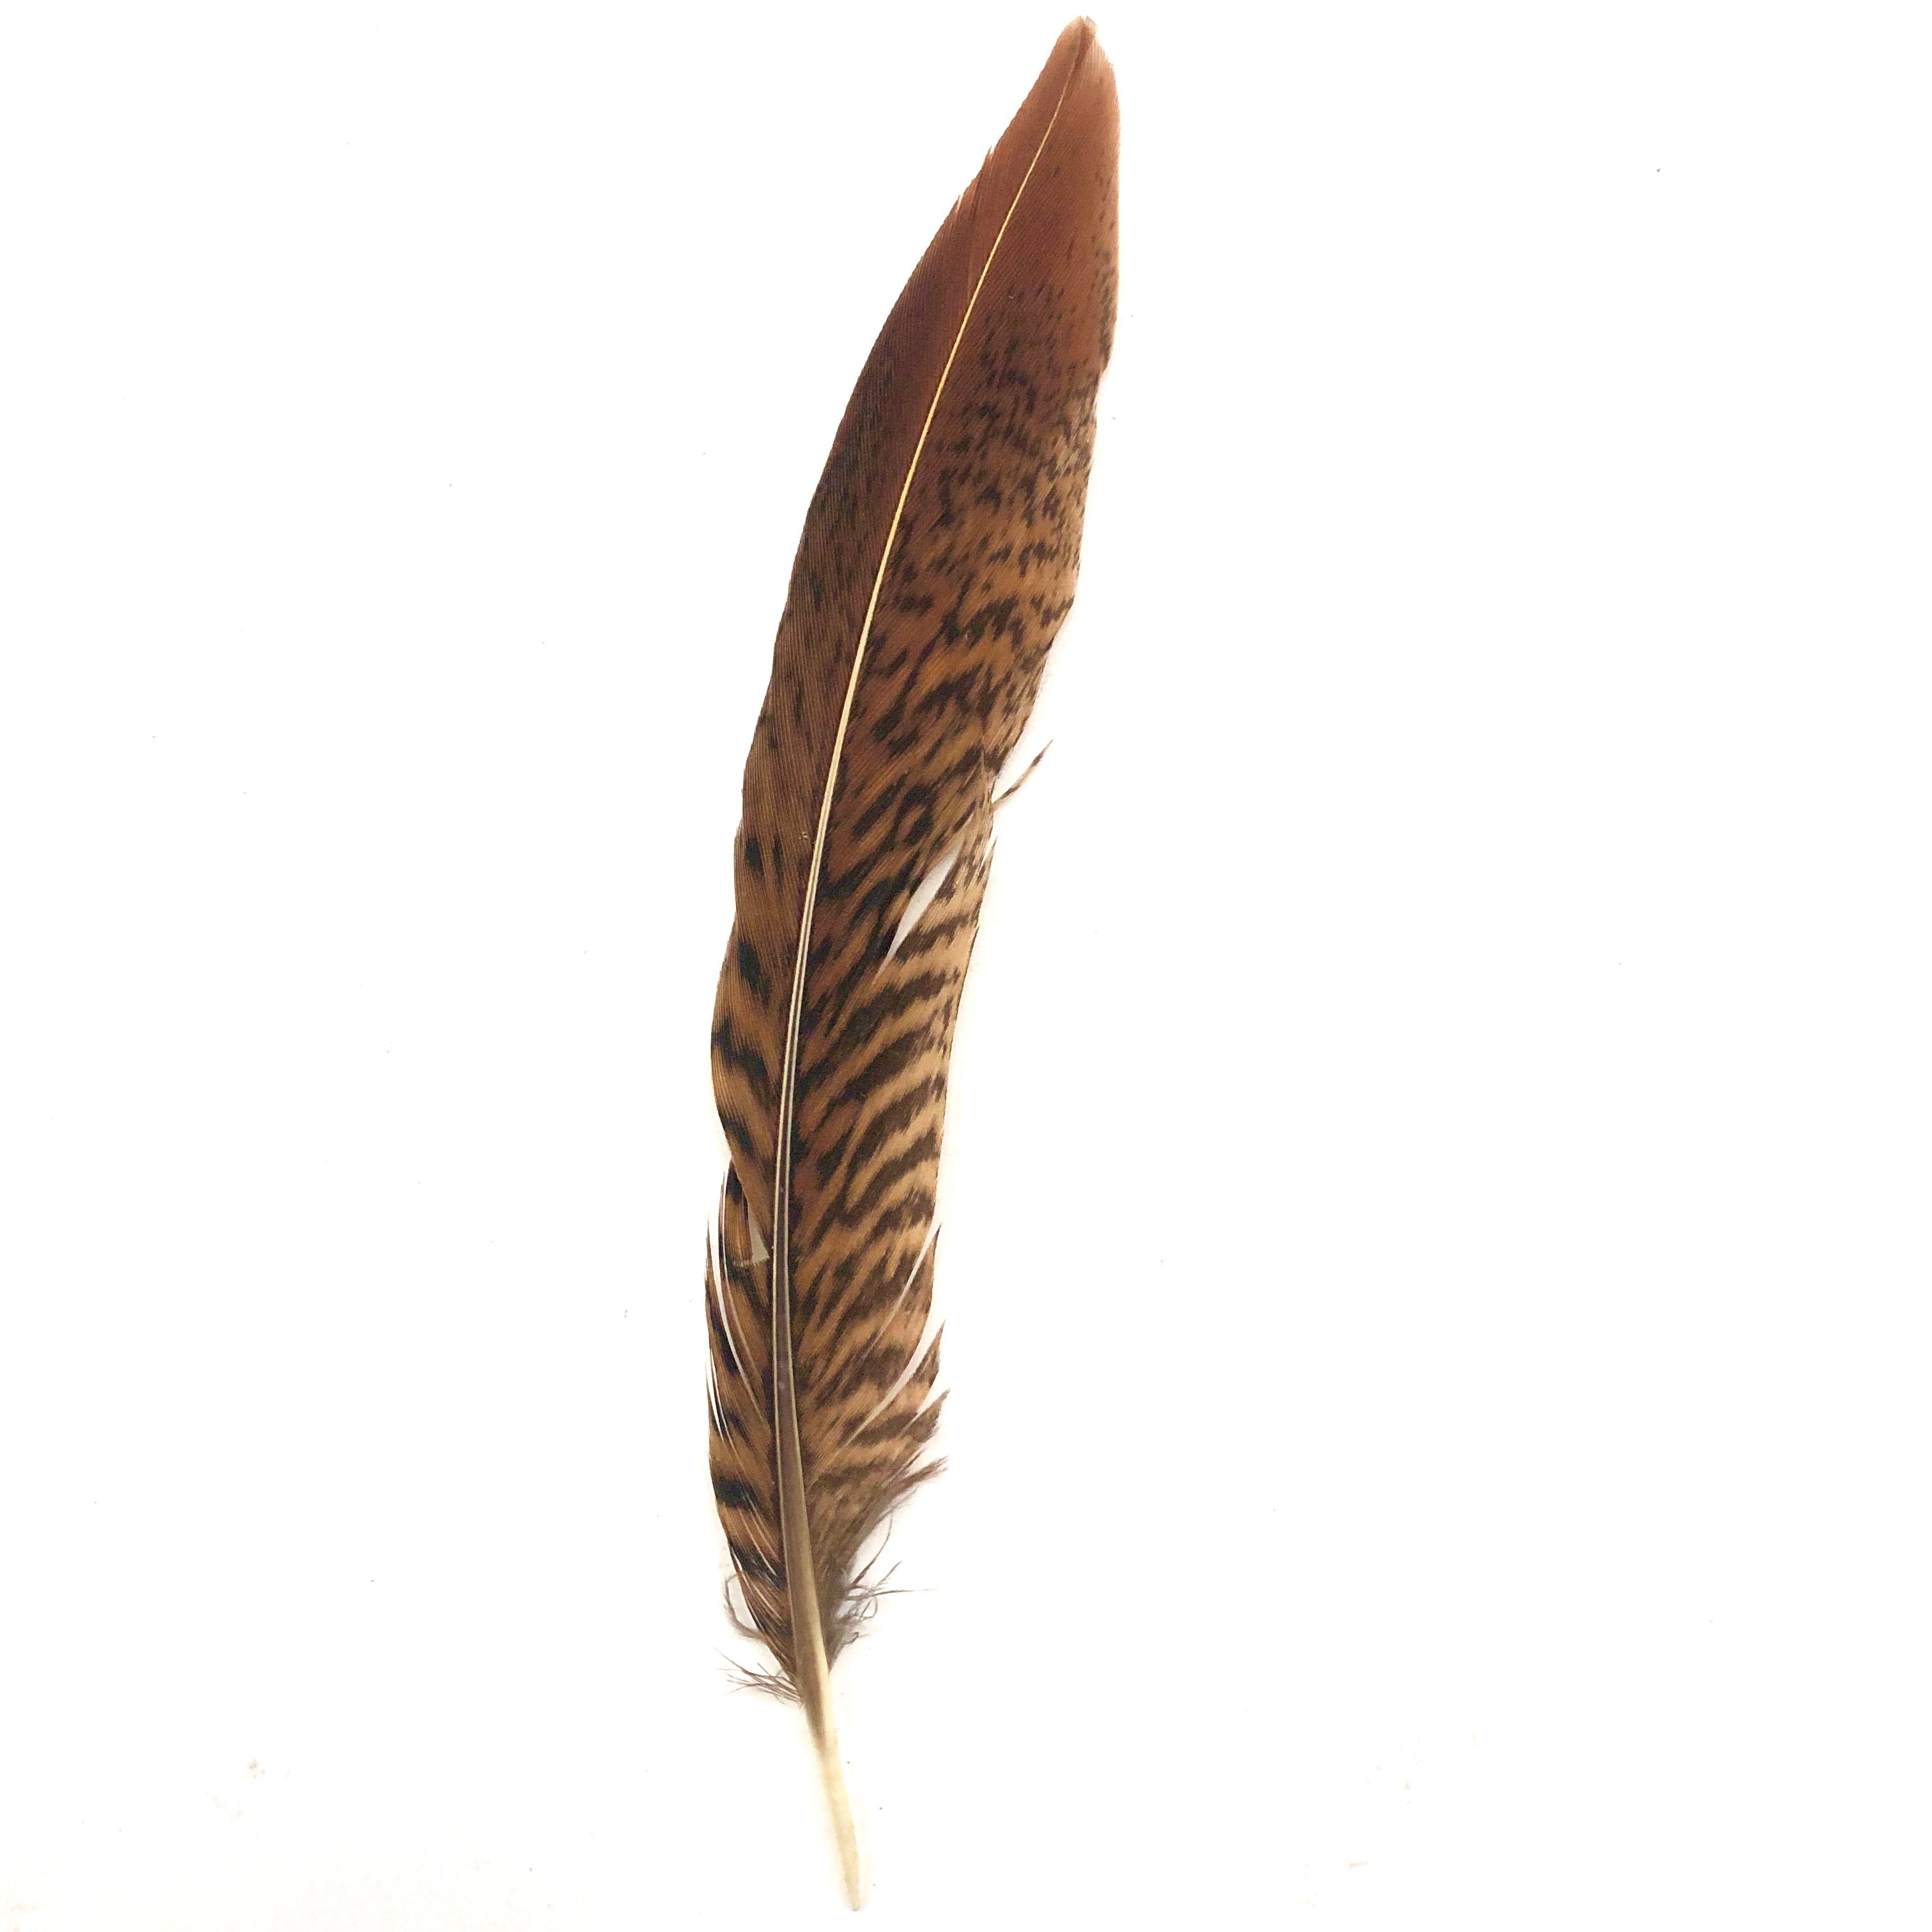 Under 6" Golden Pheasant Side Tail Feather x 10 pcs - Natural